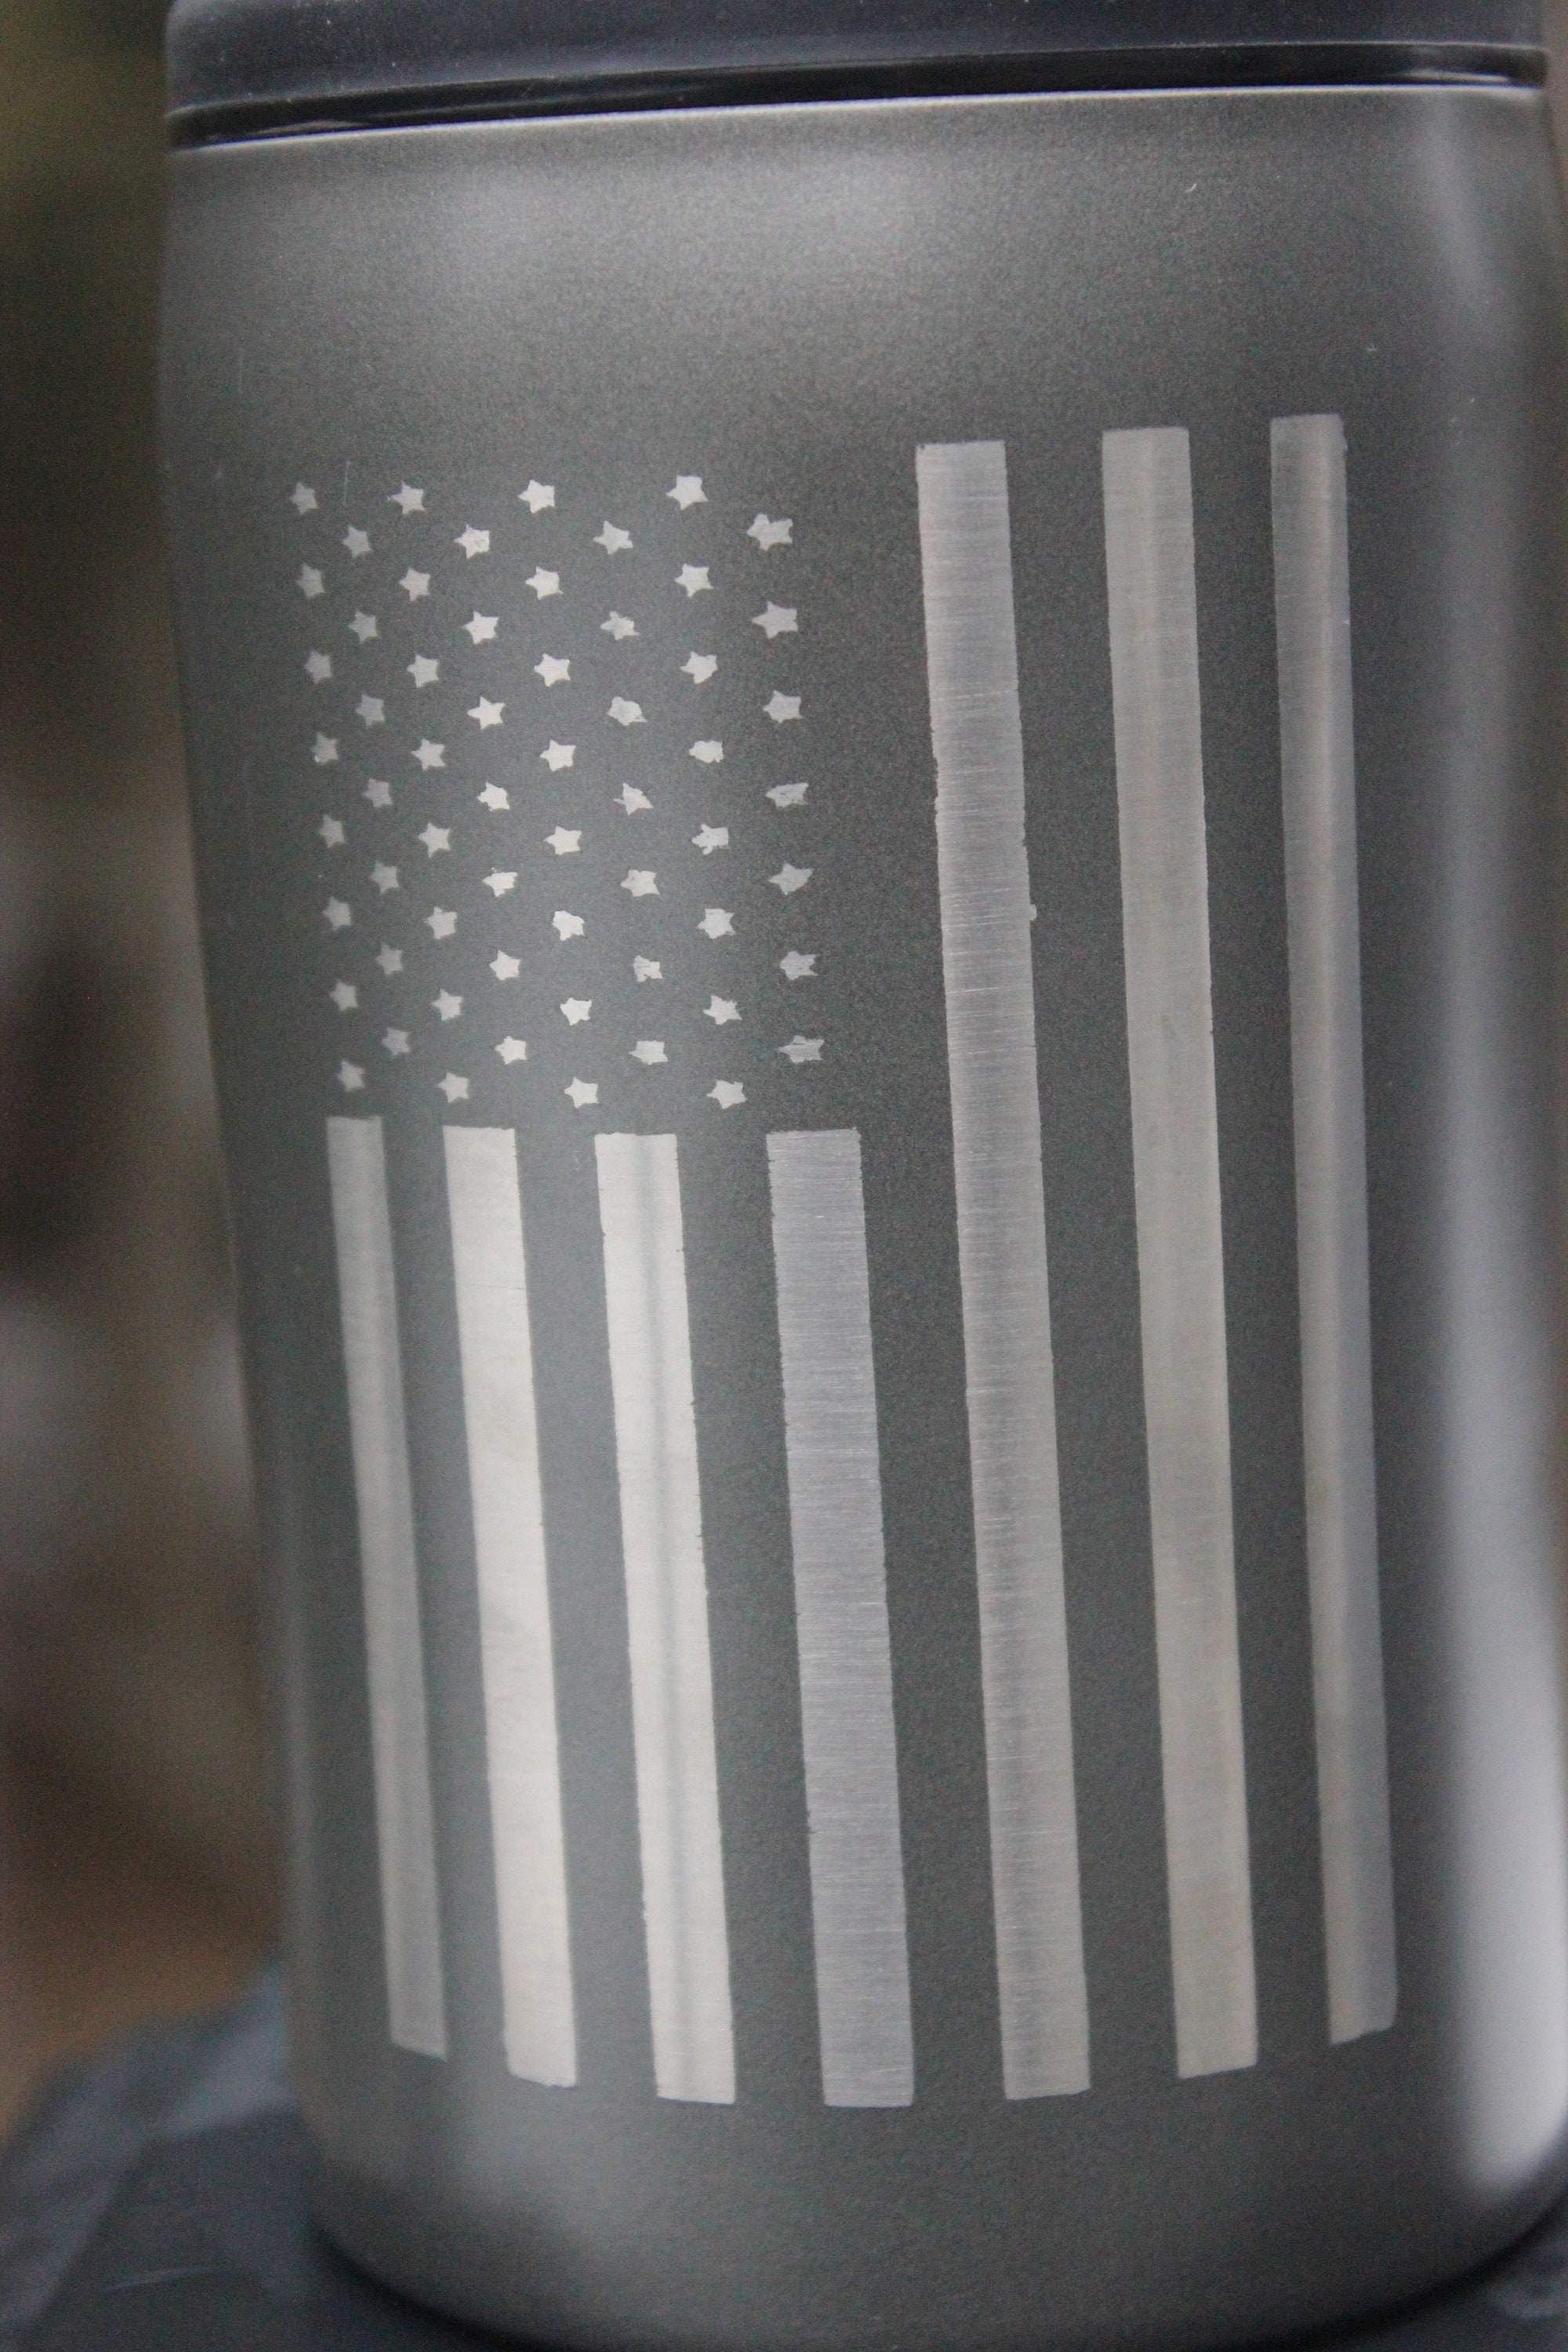 Etched US Flag Insulated Metal Koozie 3-in-1 Can Cooler Patriot American  Fits Cans, Regular and Tall, Also Glass Bottles 